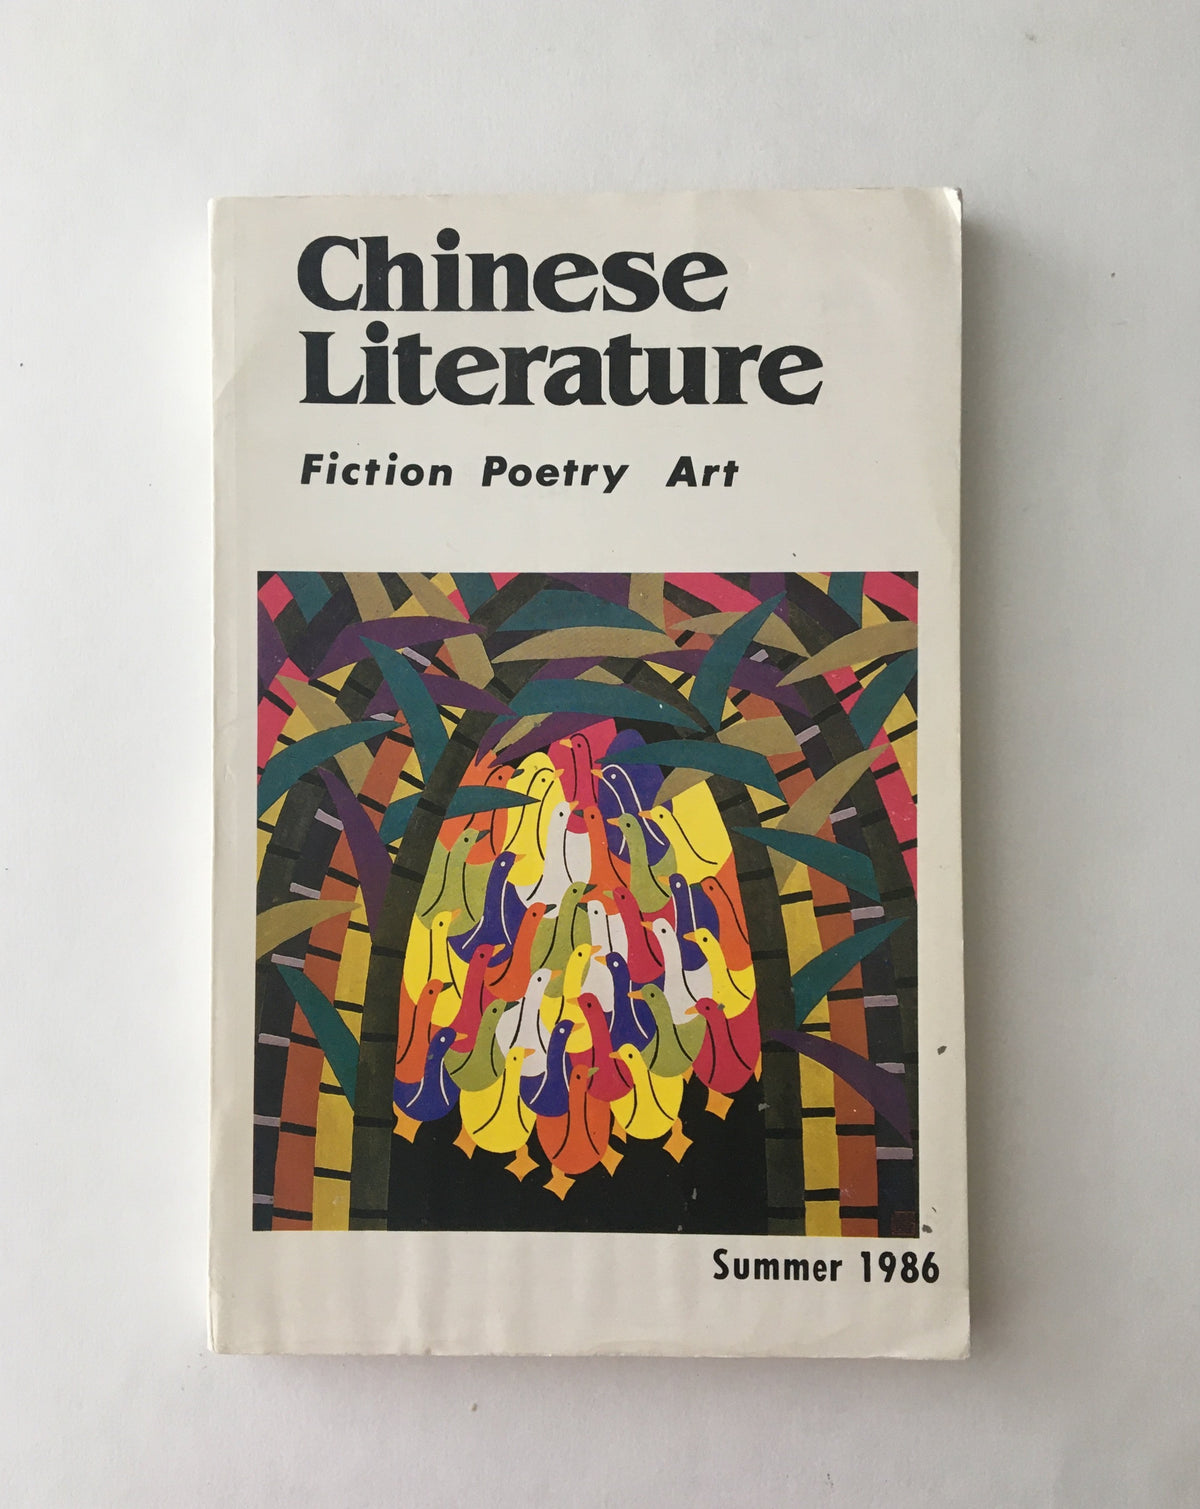 Chinese Literature: Fiction Poetry Art Summer 1986